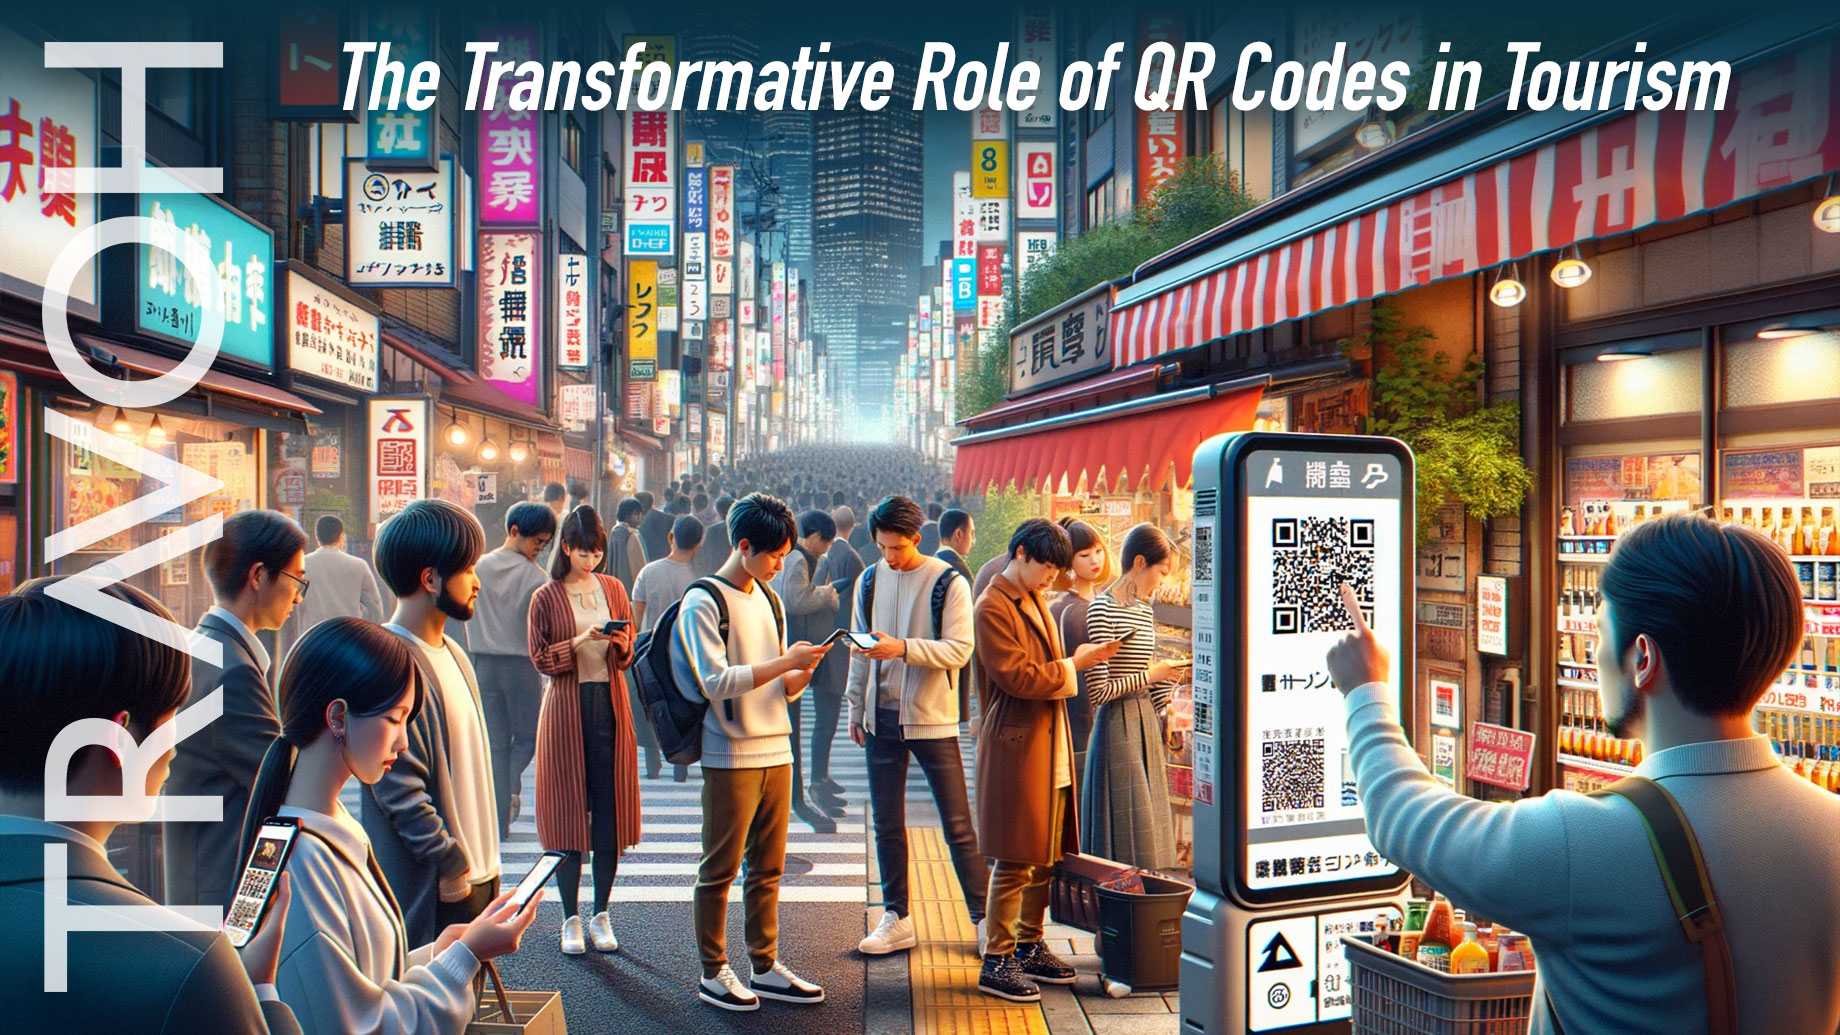 The Transformative Role of QR Codes in Tourism